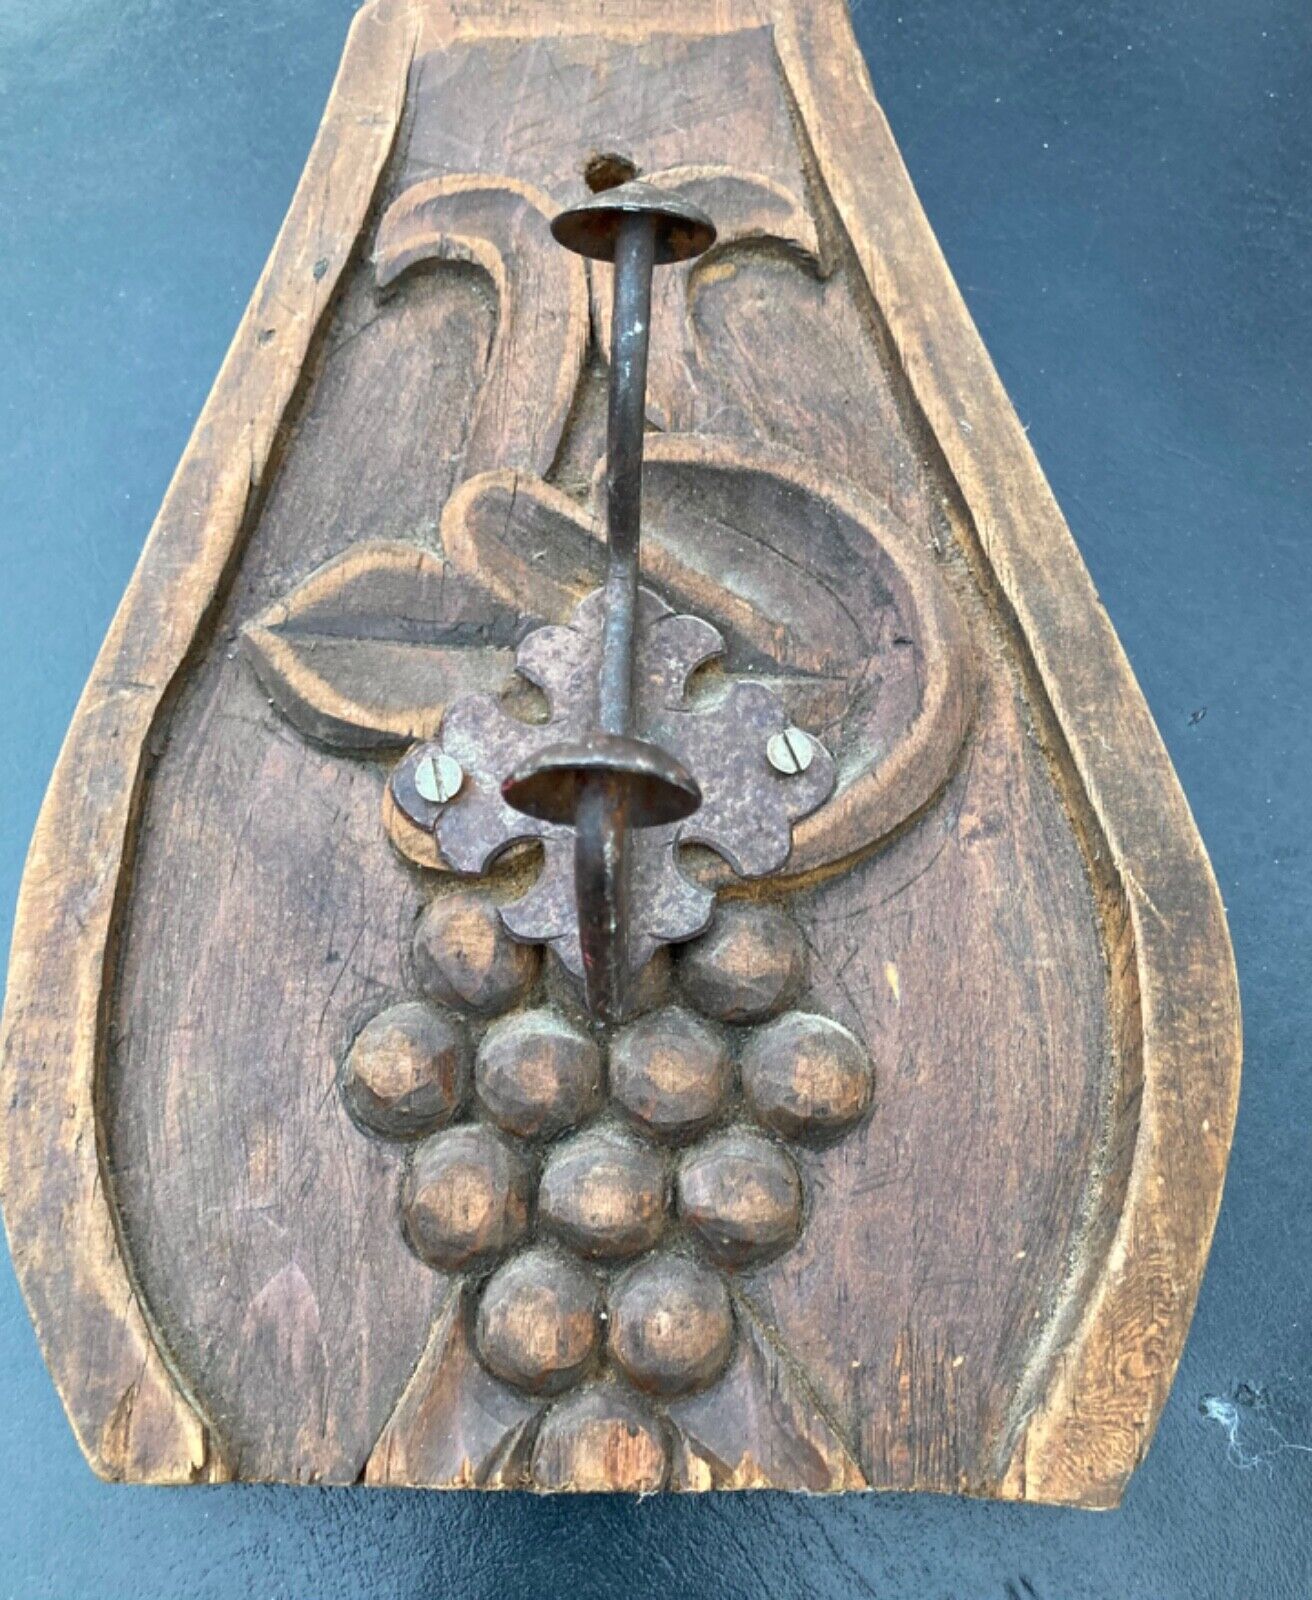 Antique Grapes Plaque Primitive Carved Wood with Iron Hook Hanging Hat Key Rack